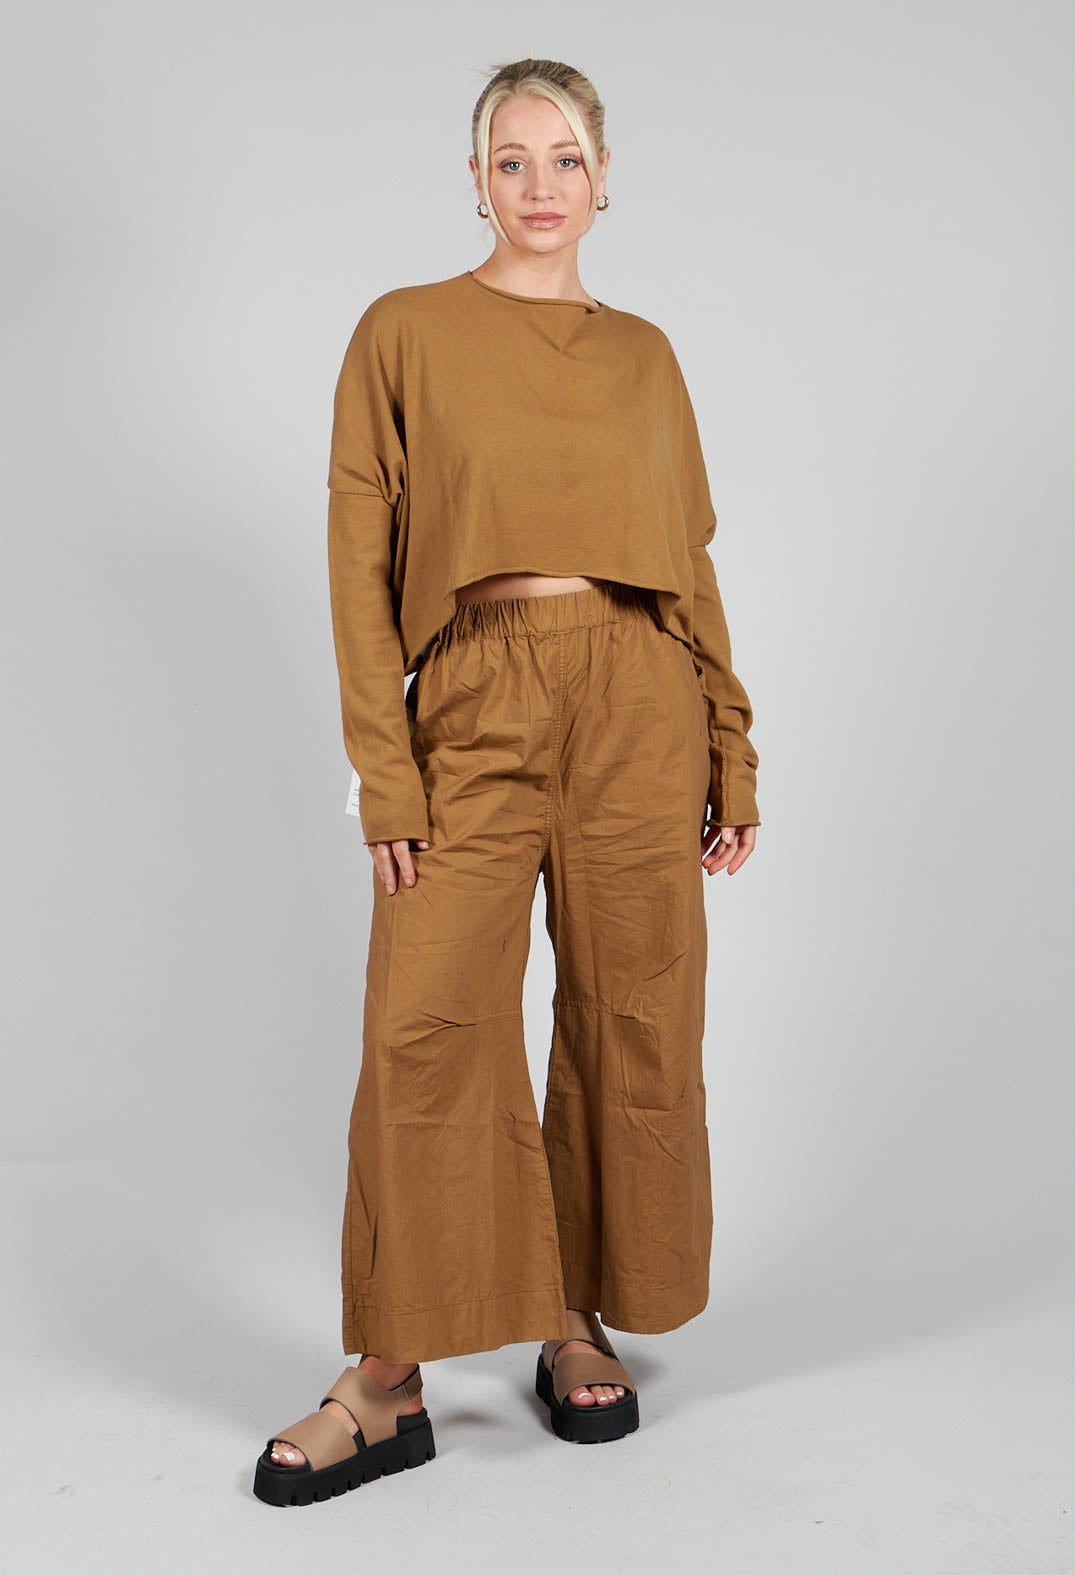 Externo Jumper in Dried Tobacco